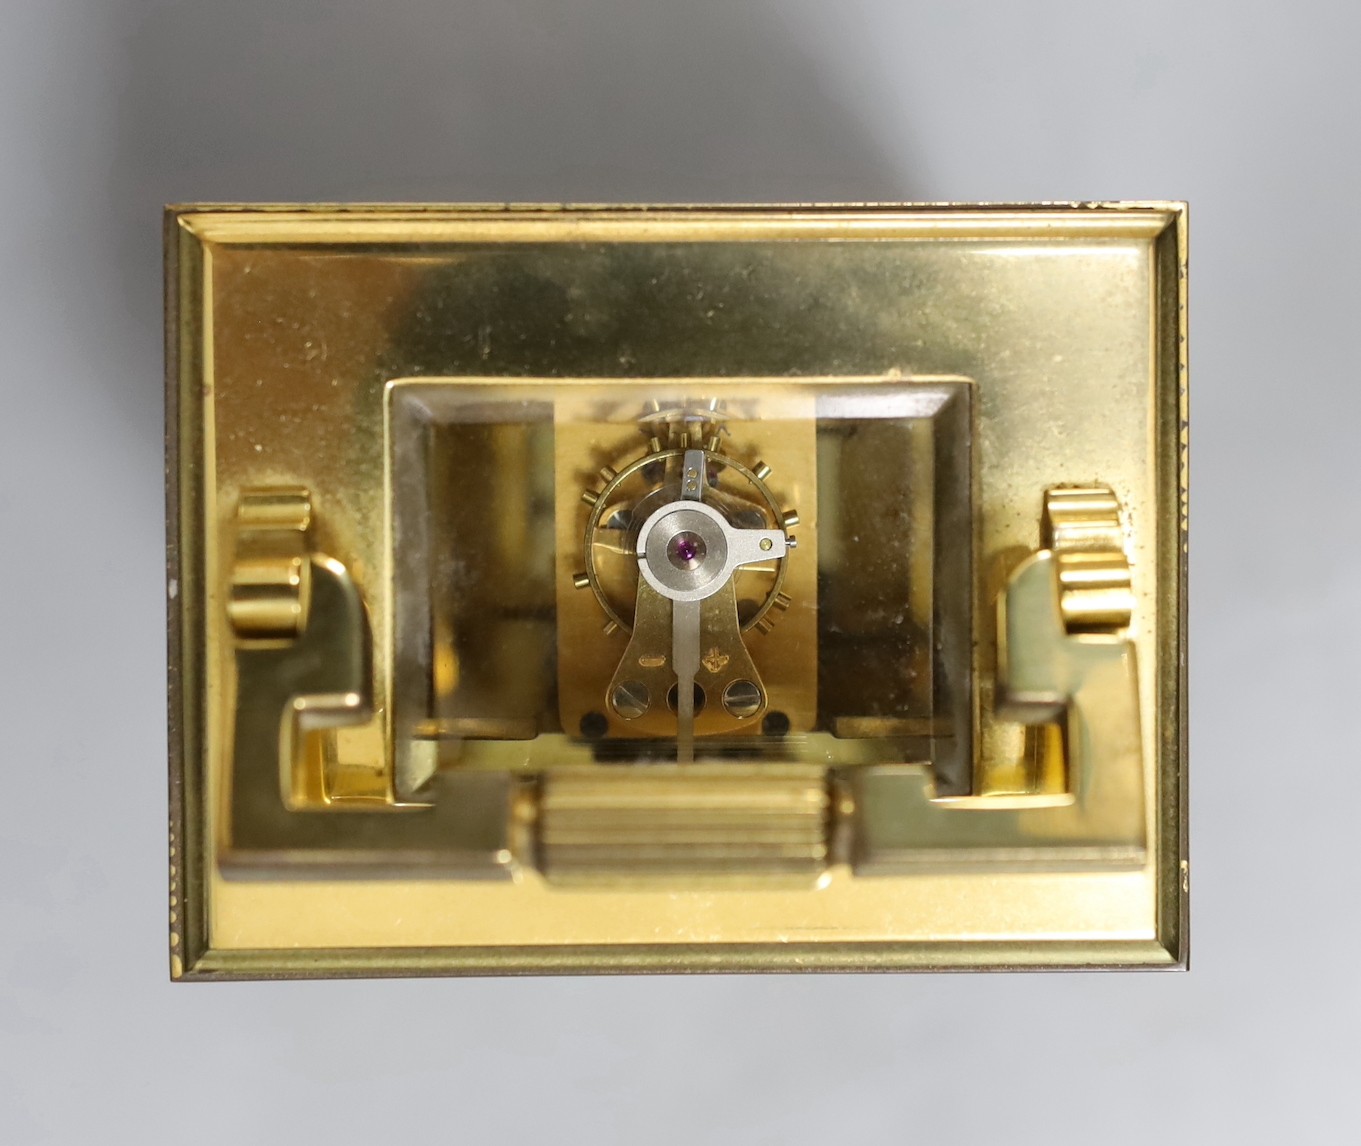 A French brass carriage timepiece, Mappin & Webb, 11.5 cms high.